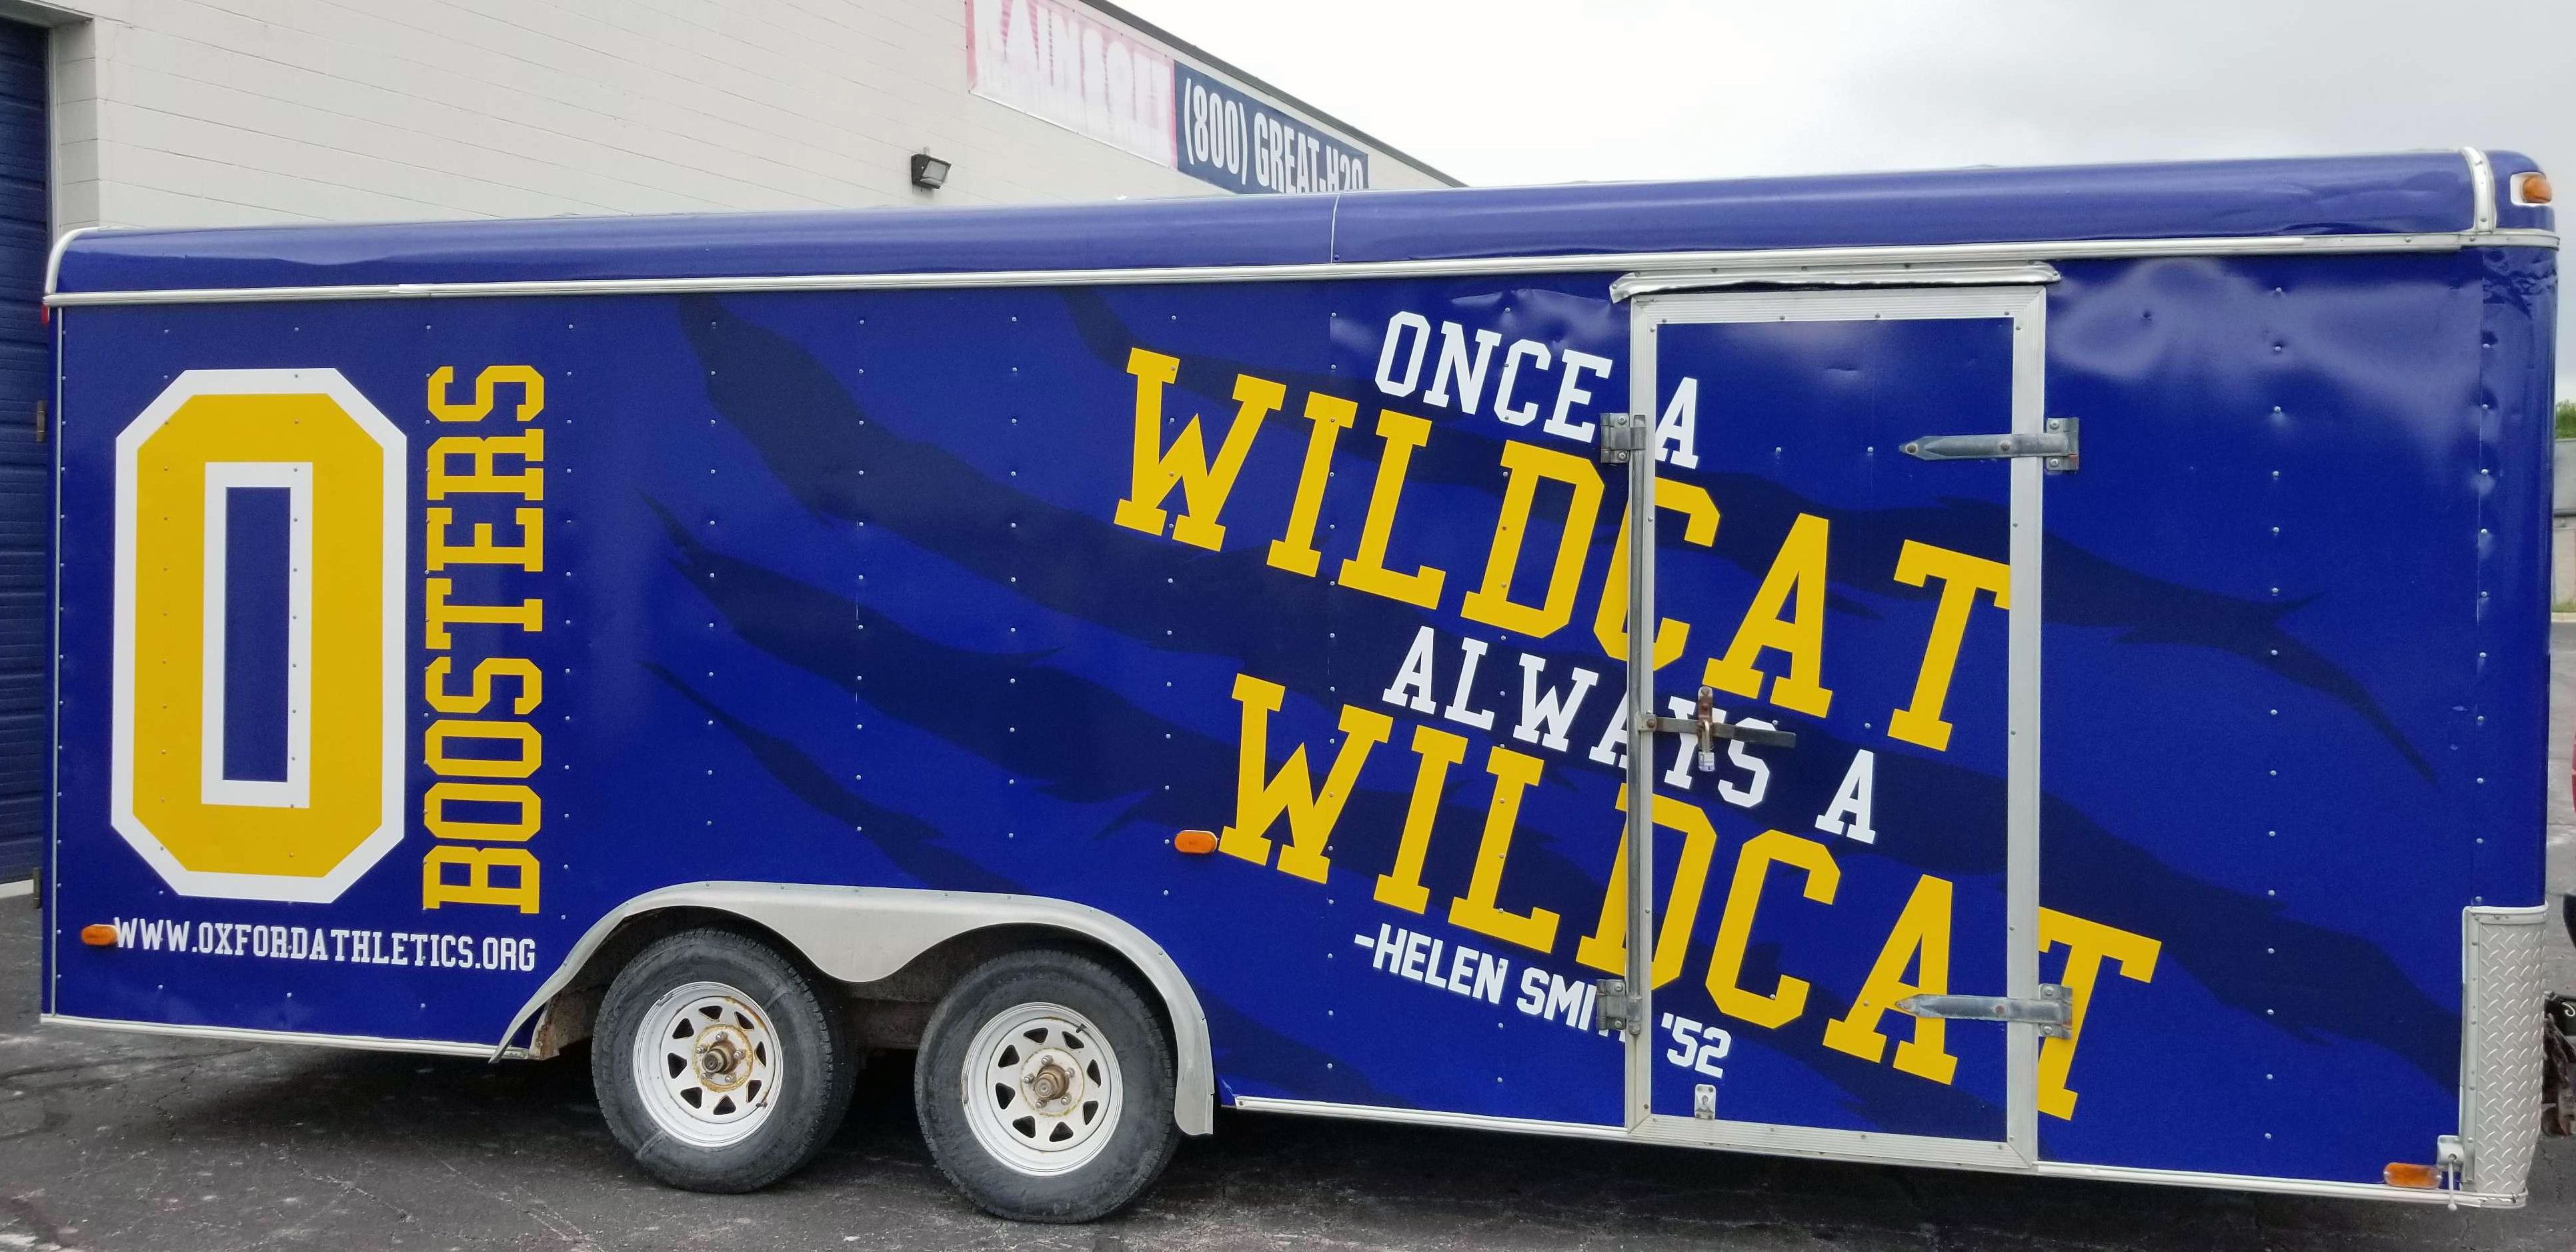 A commercial trailer with a custom vinyl wrap with yellow, blue, and white logos and school design.